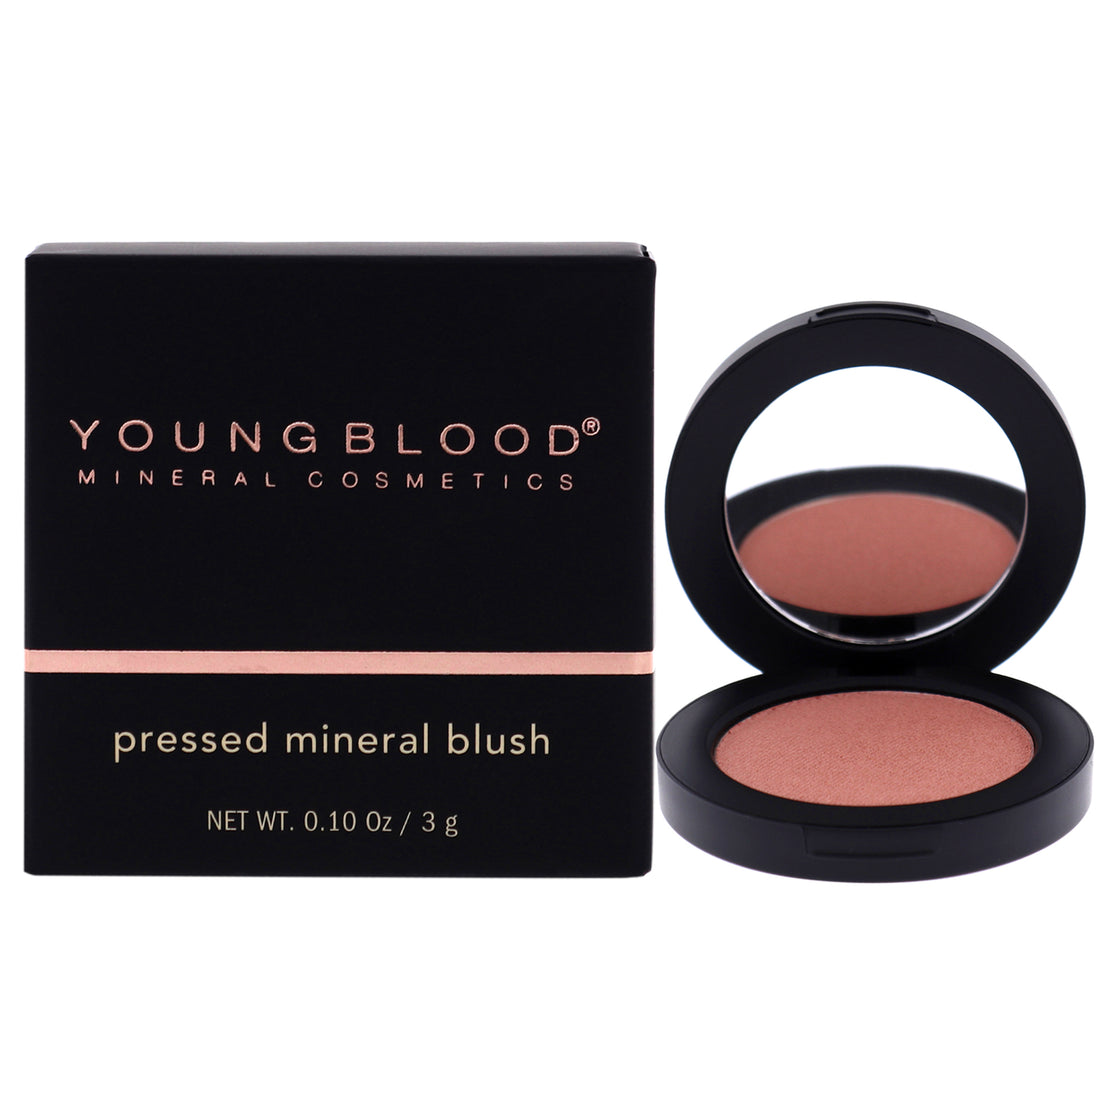 Pressed Mineral Blush - Sugar Plum by Youngblood for Women - 0.10 oz Blush